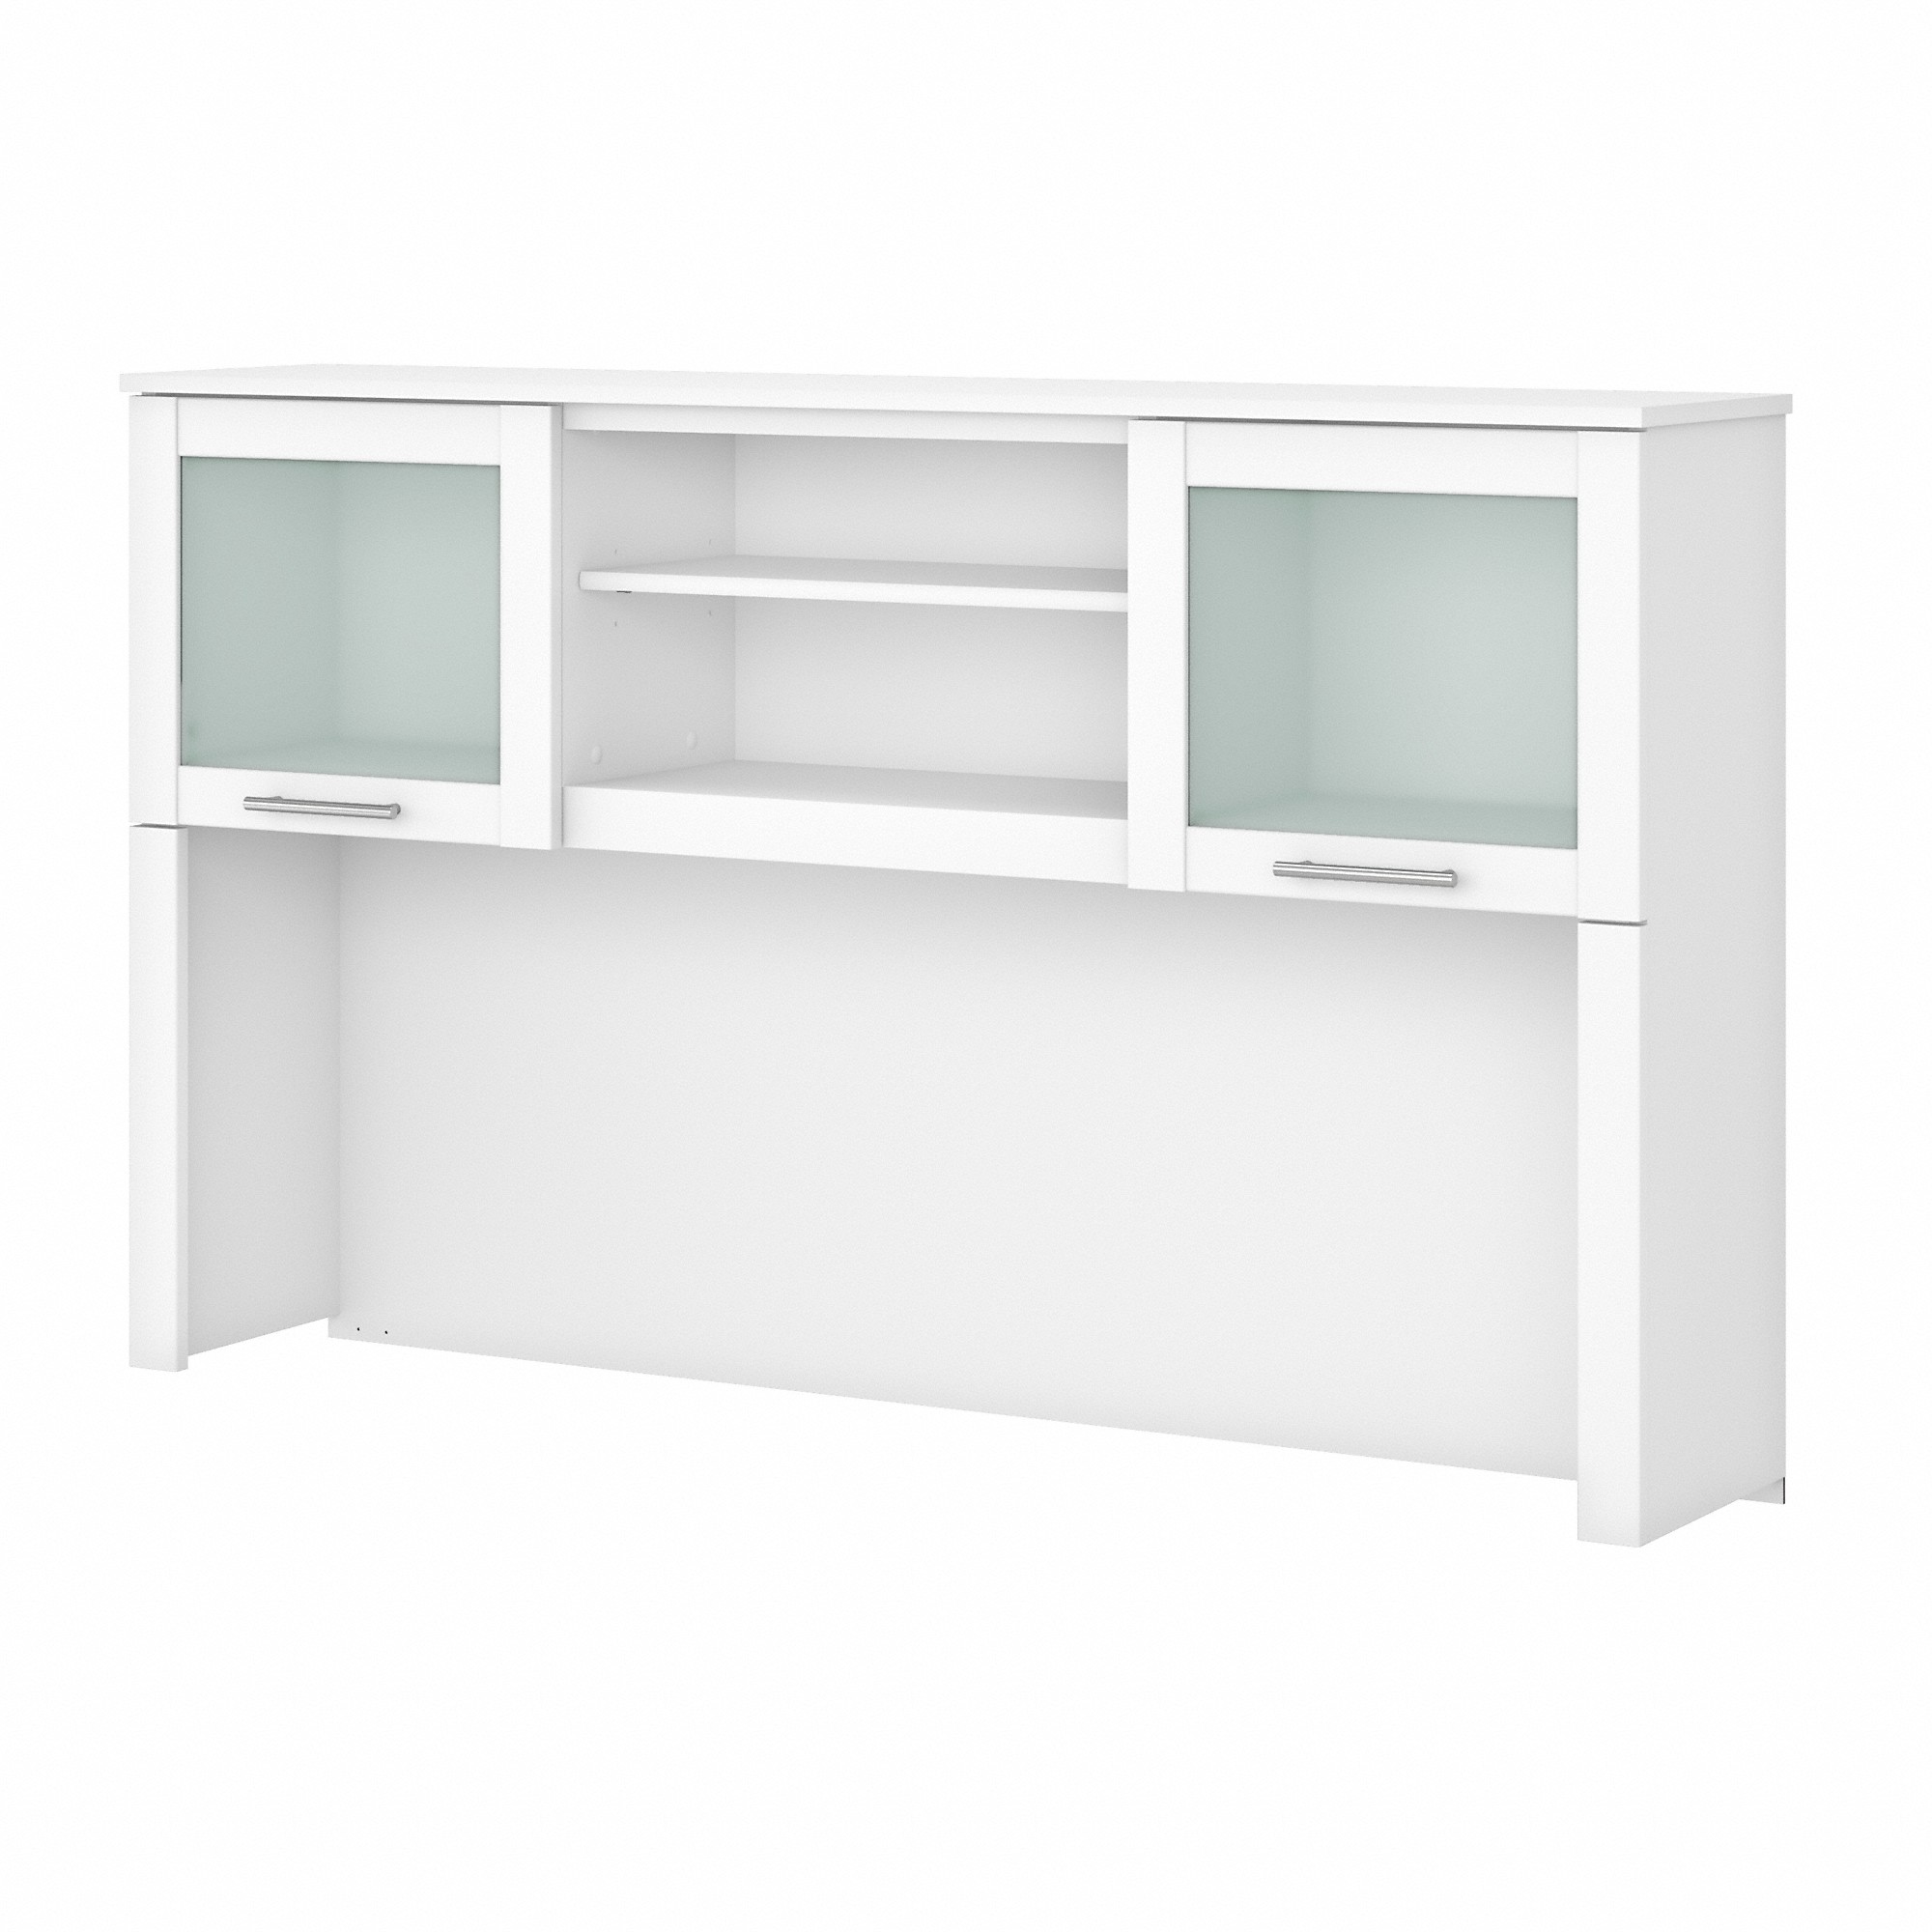 Bush Furniture Somerset 60 in 2-Door Hutch with Open Storage in White - fits on Somerset 60 in L Desk (Sold Separately) - image 1 of 8